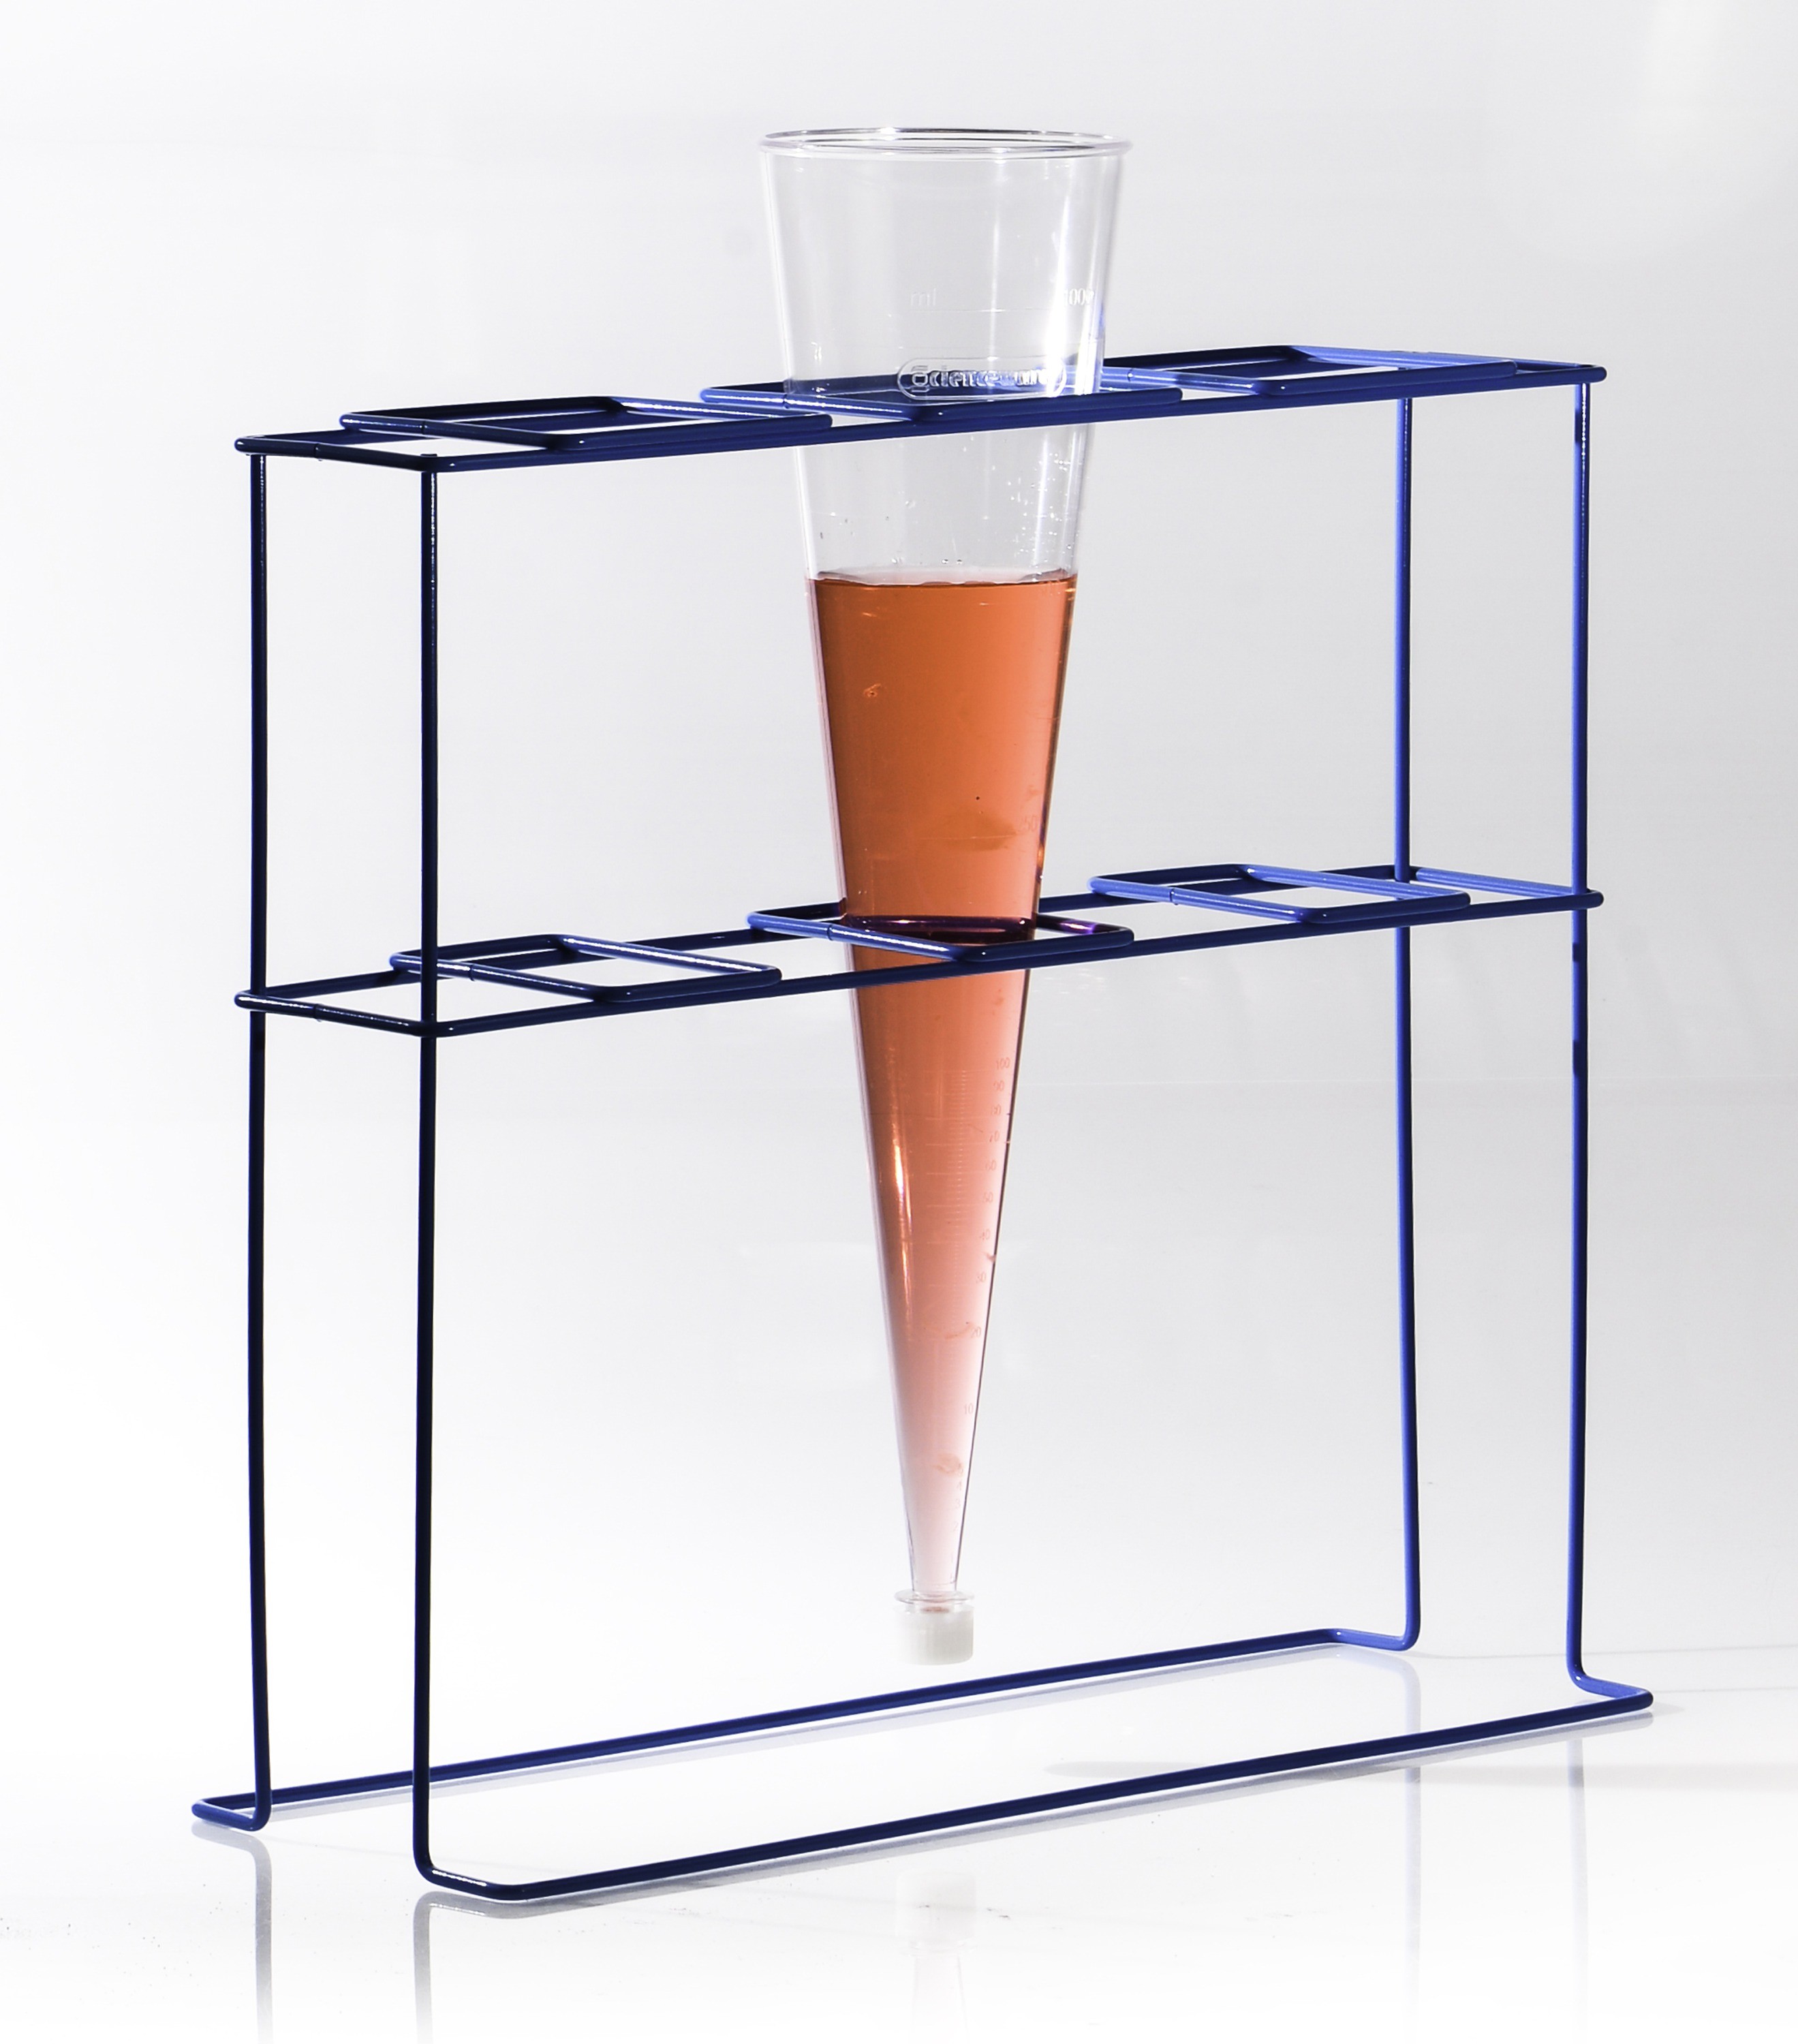 SP Bel-Art Poxygrid Imhoff Cone Rack; 3 Places, 17¹⁄₂ x 6³⁄₄ x 16 in.